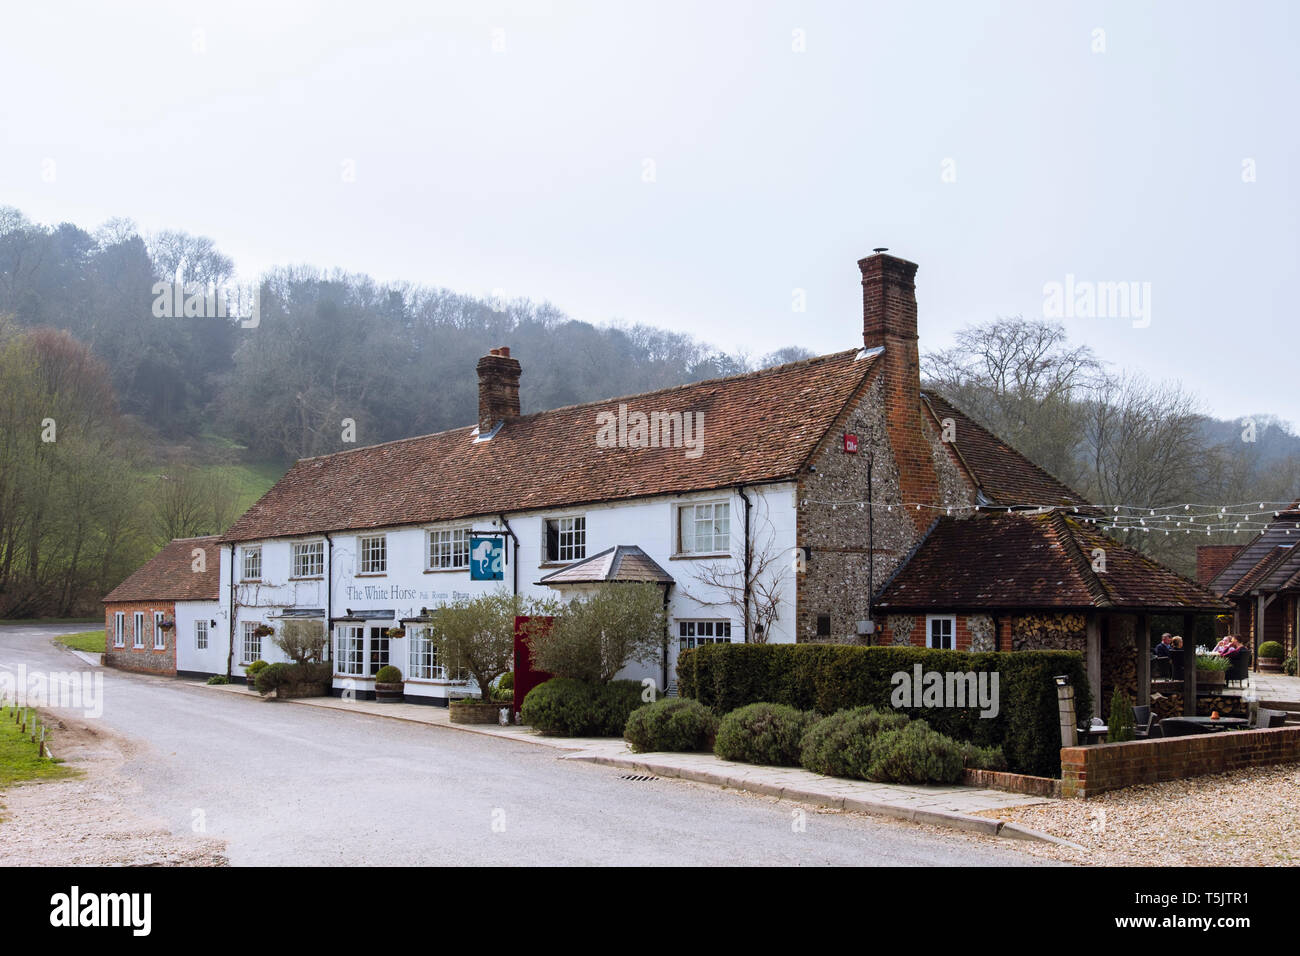 The White Horse inn and country hotel in South Downs National Park. Chilgrove, Chichester, West Sussex, England, UK, Britain Stock Photo